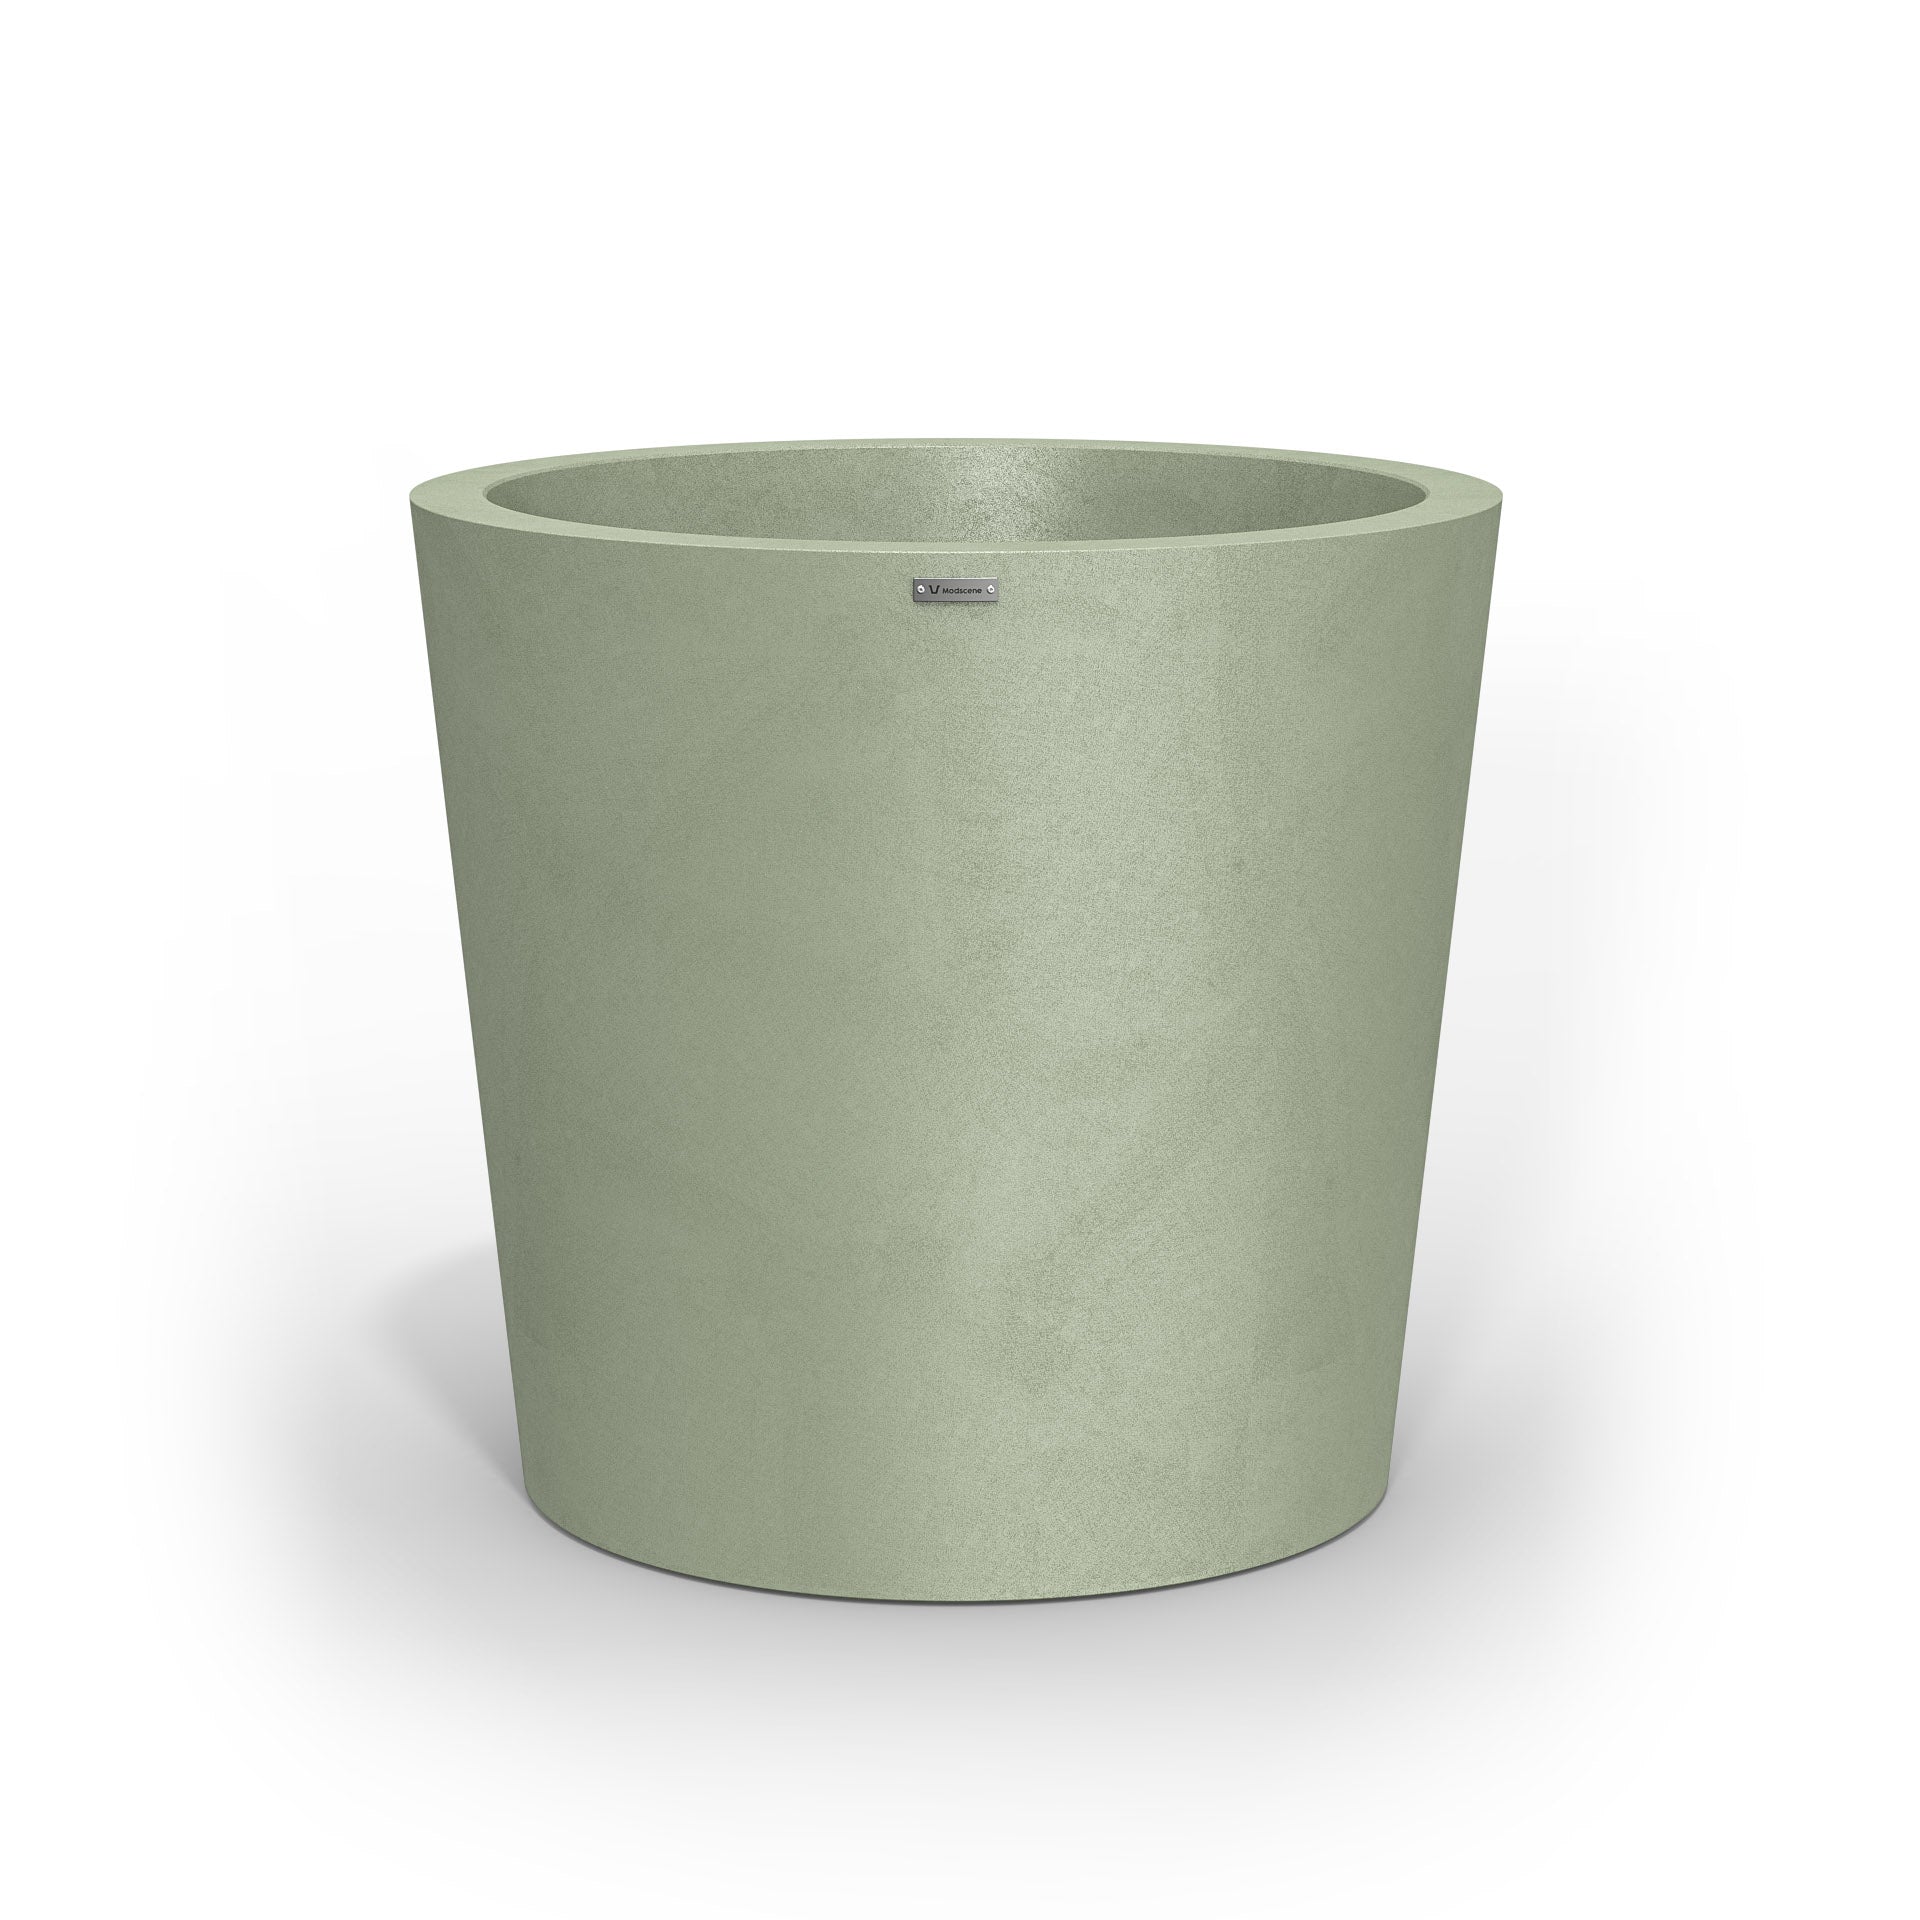 A large Modscene pot planter in a green colour with a concrete look finish.